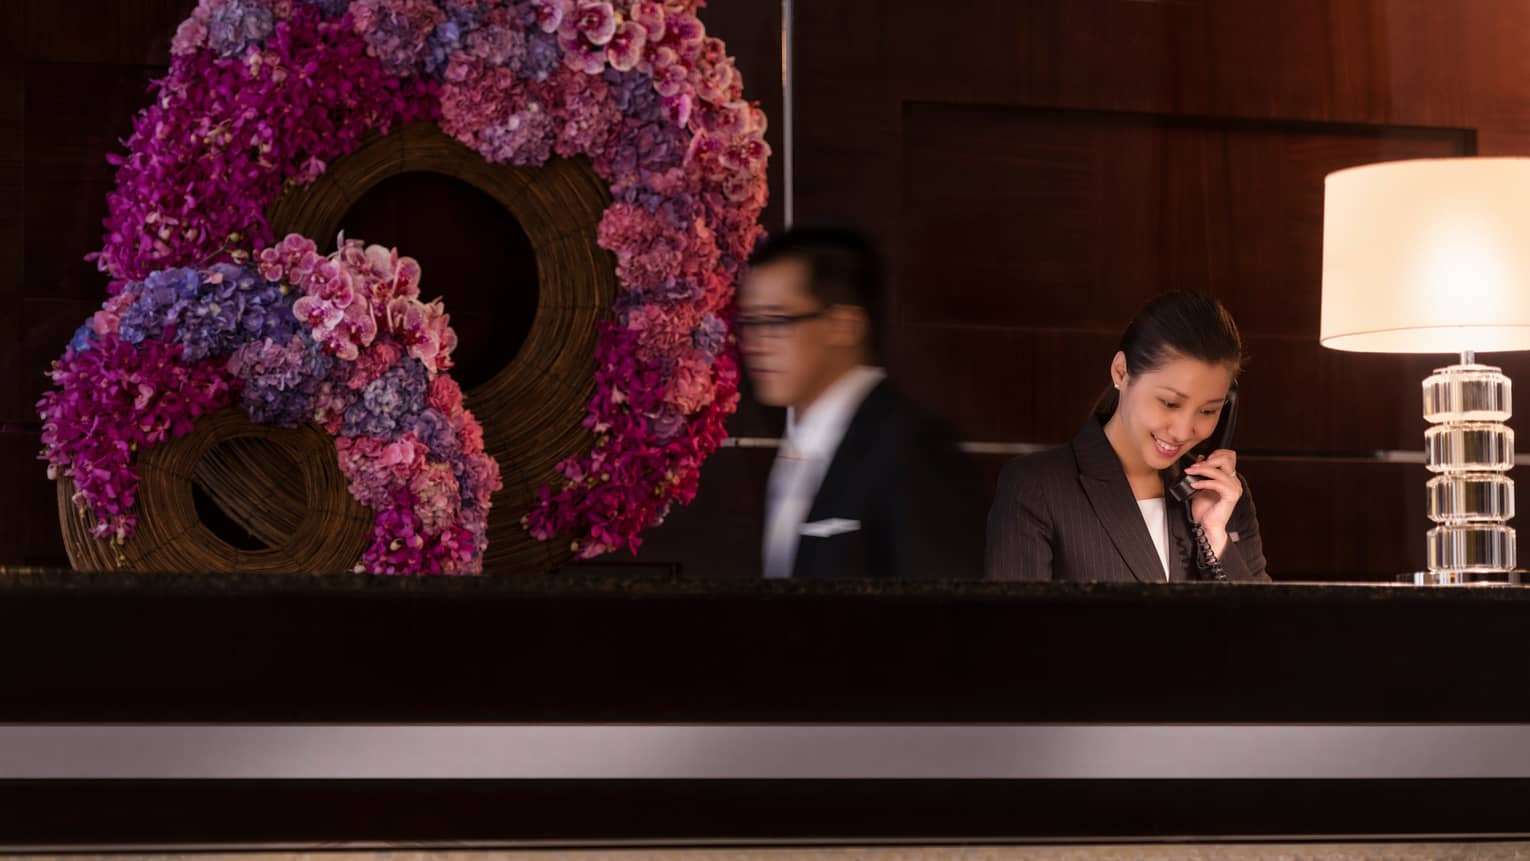 Staff at concierge desk in front of pink-and-purple floral wreaths